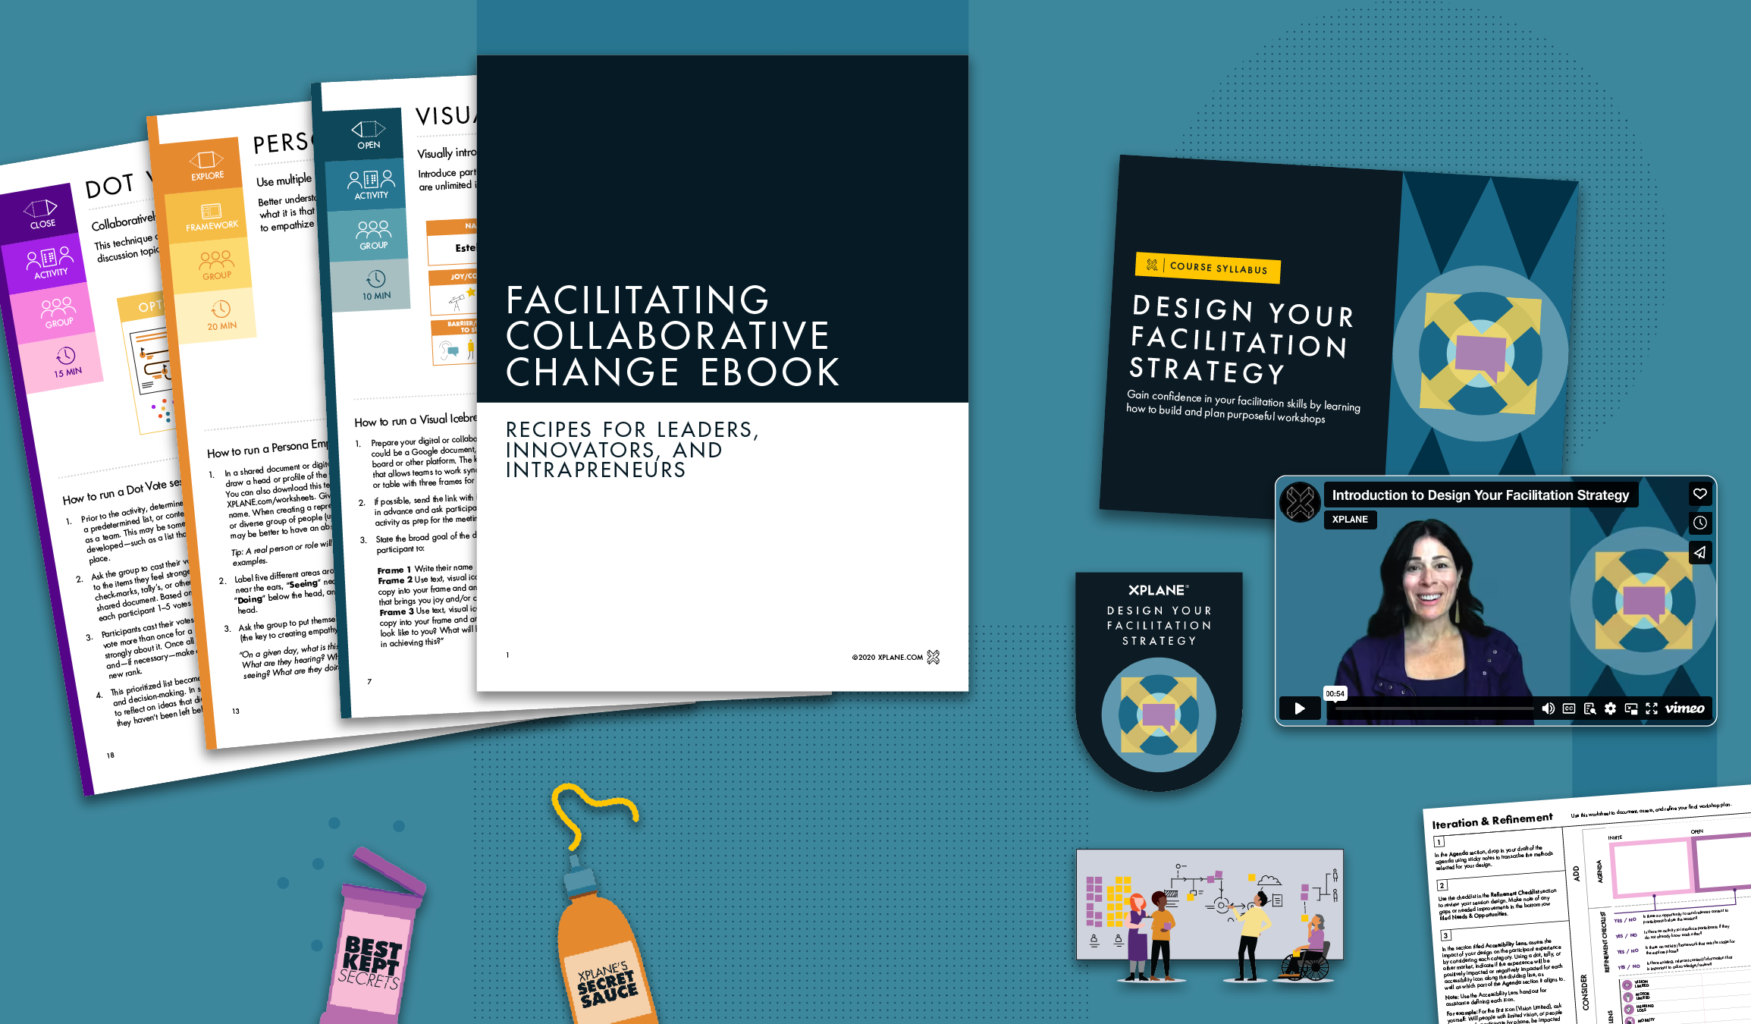 Array of Facilitating Collaborative Change eBook and Design Your Facilitation Strategy course content against a blue background.